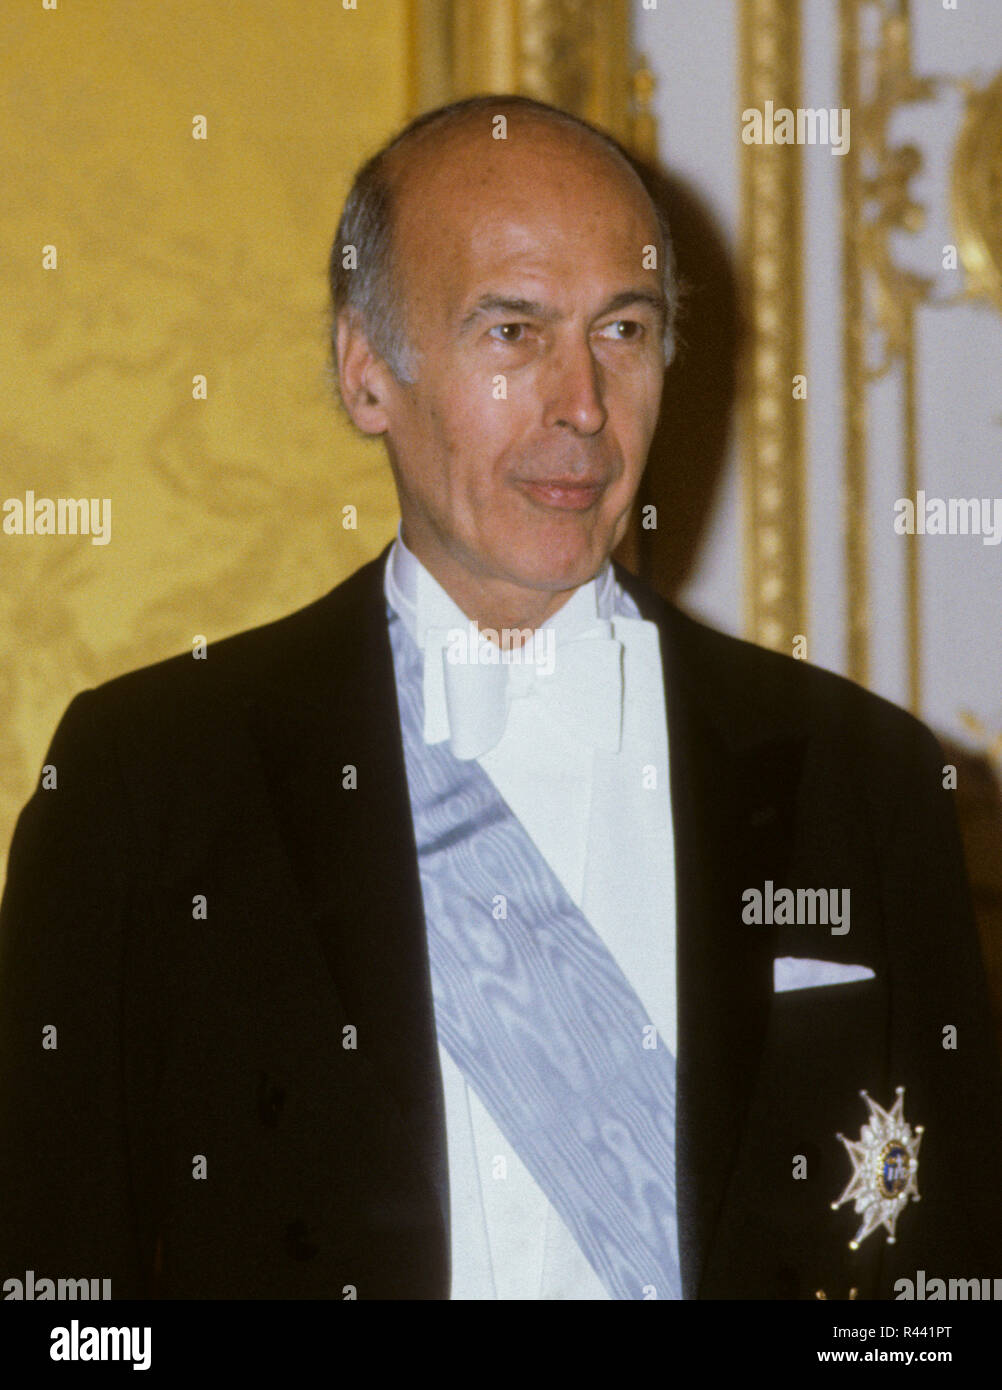 VALERY GISCARD D ÉSTAING President France in gala Stock Photo